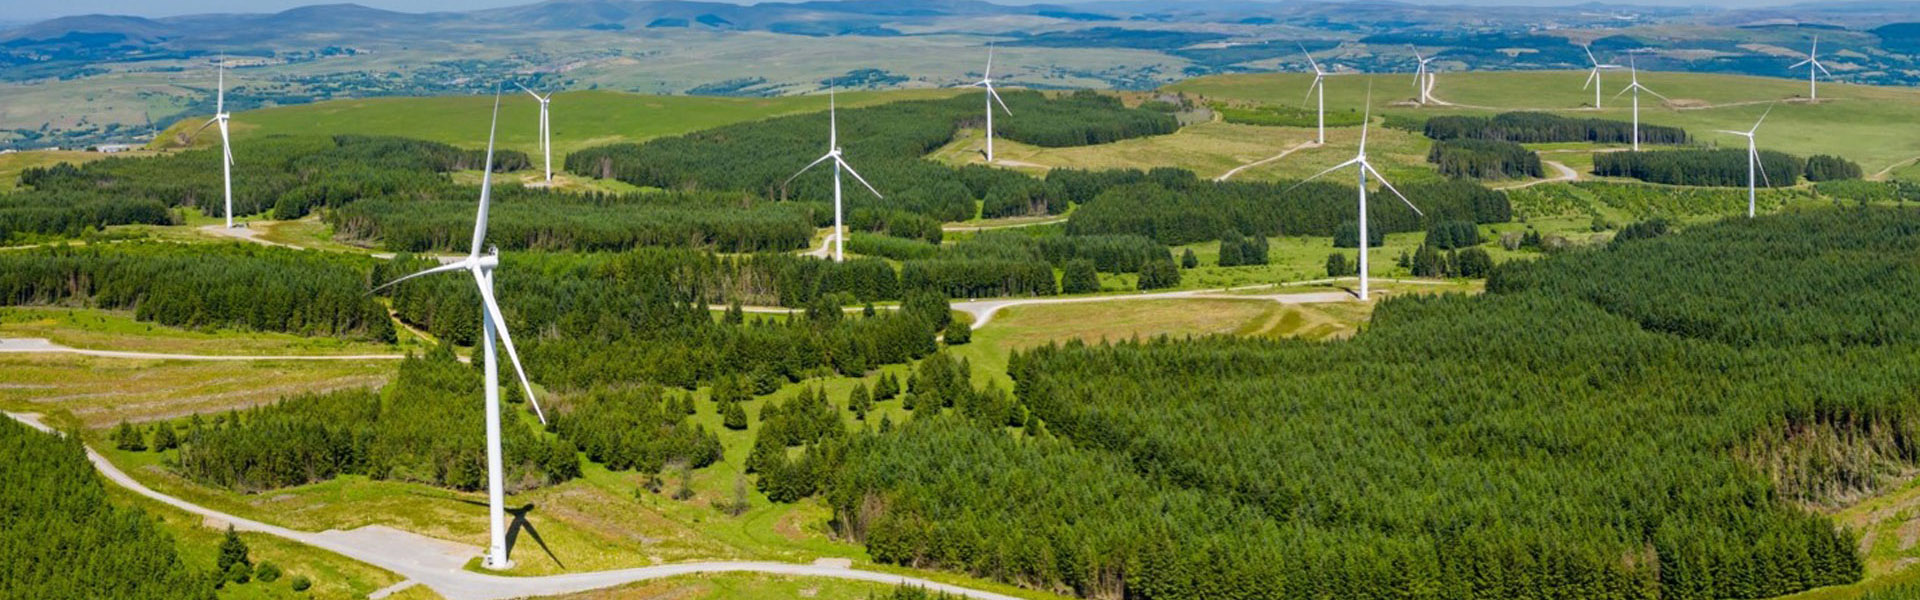 Windfarm in the countryside